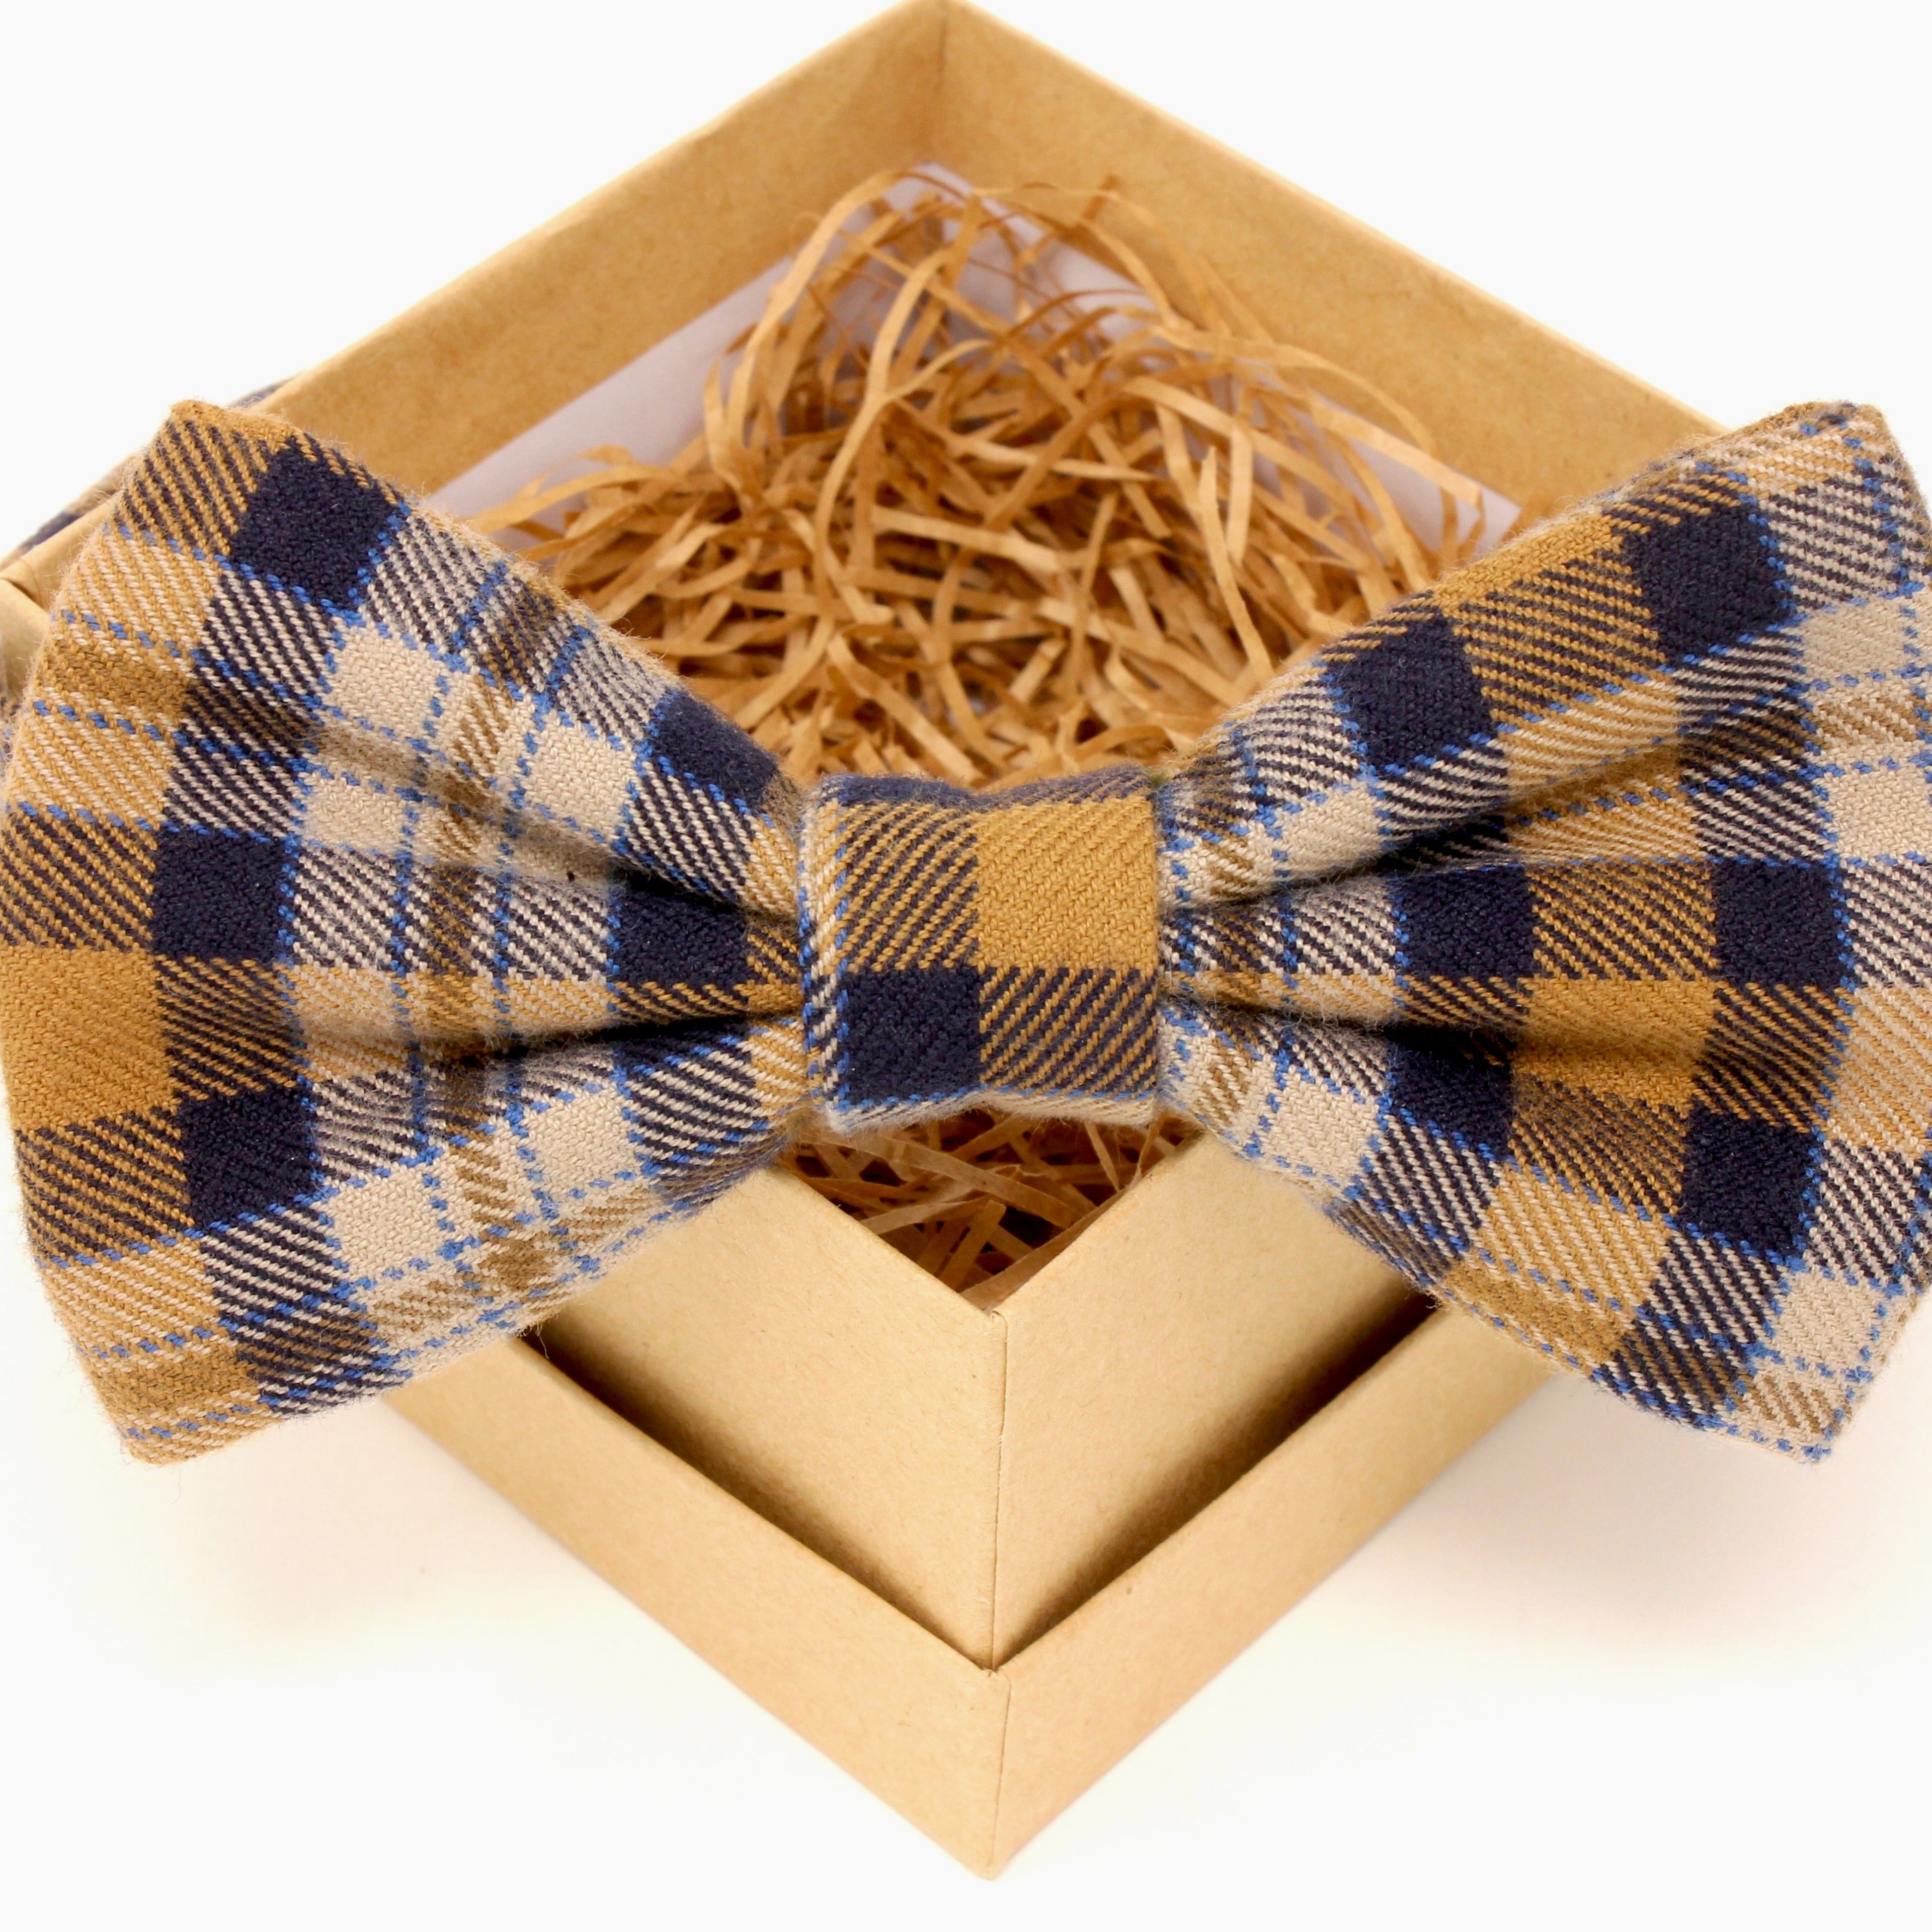 Gold & Navy Plaid Flannel Bow Tie